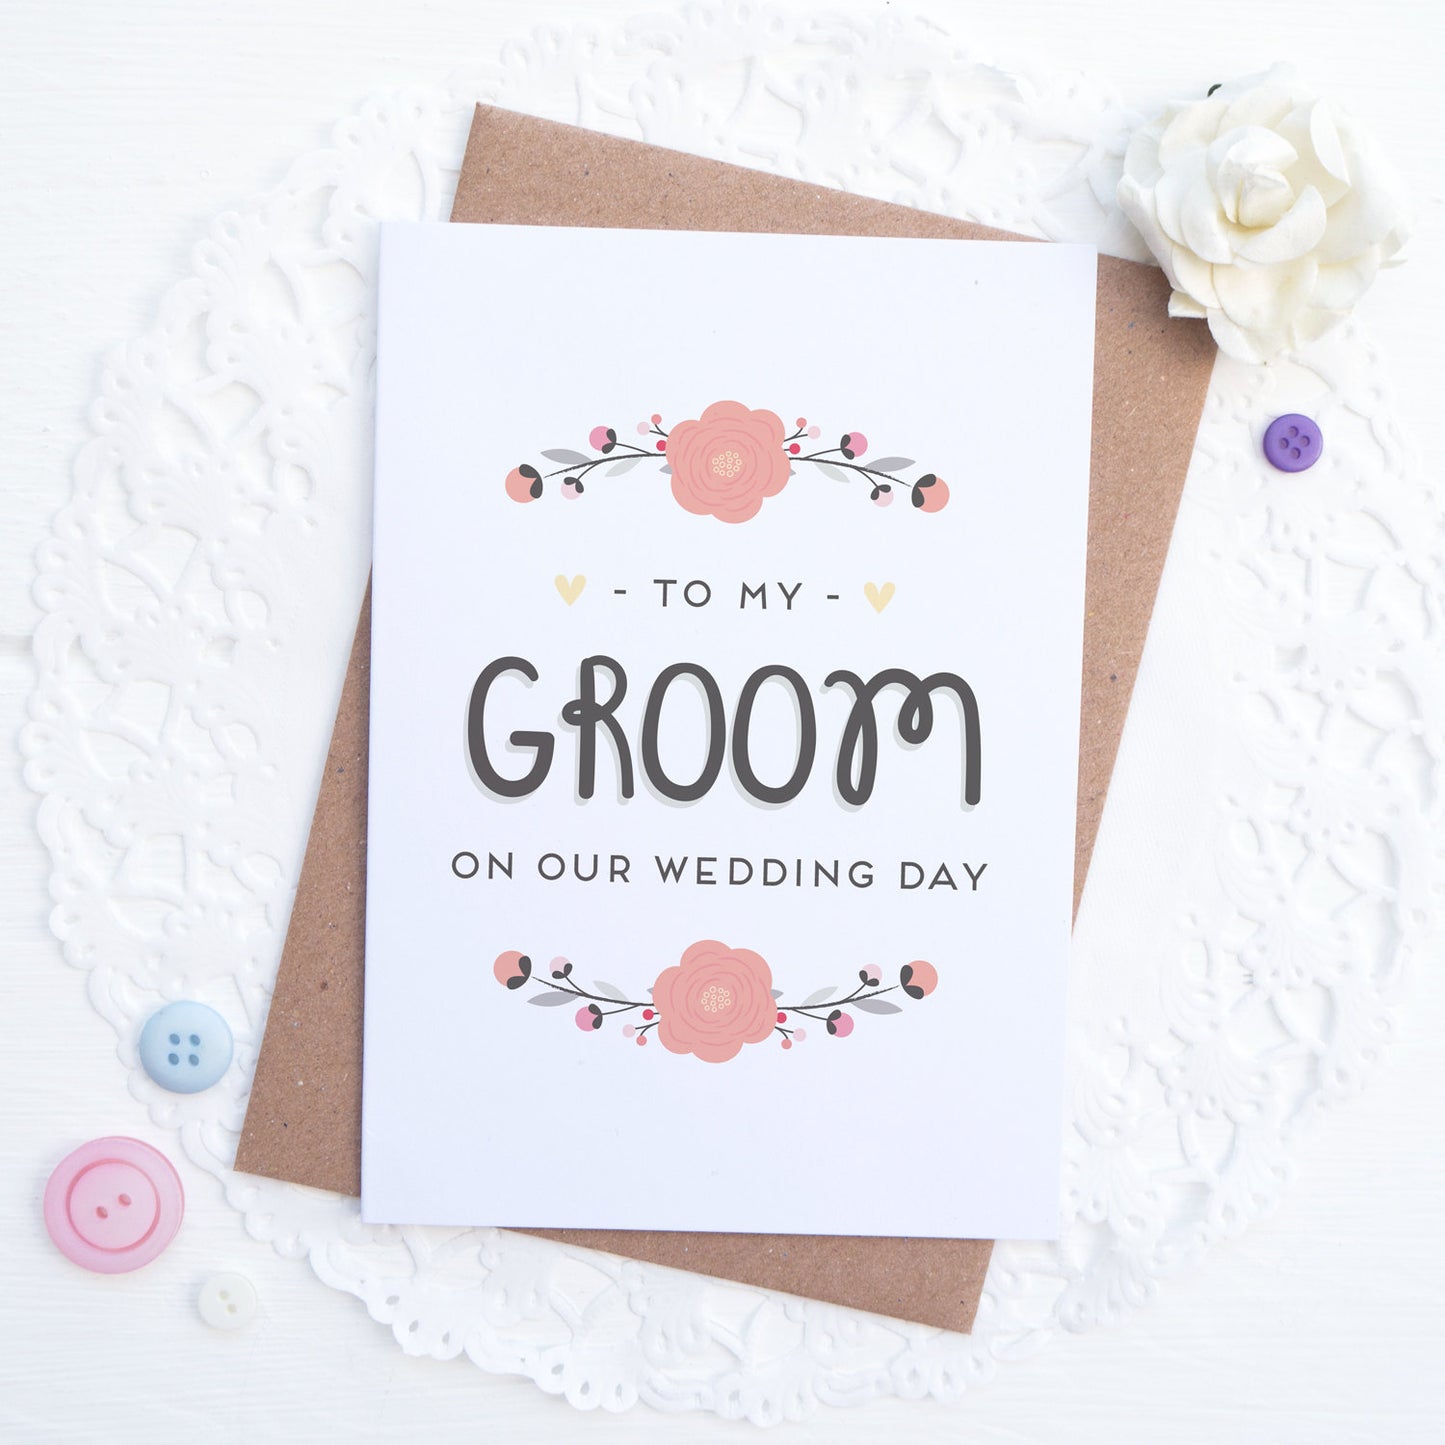 To my groom on our wedding day card in pink